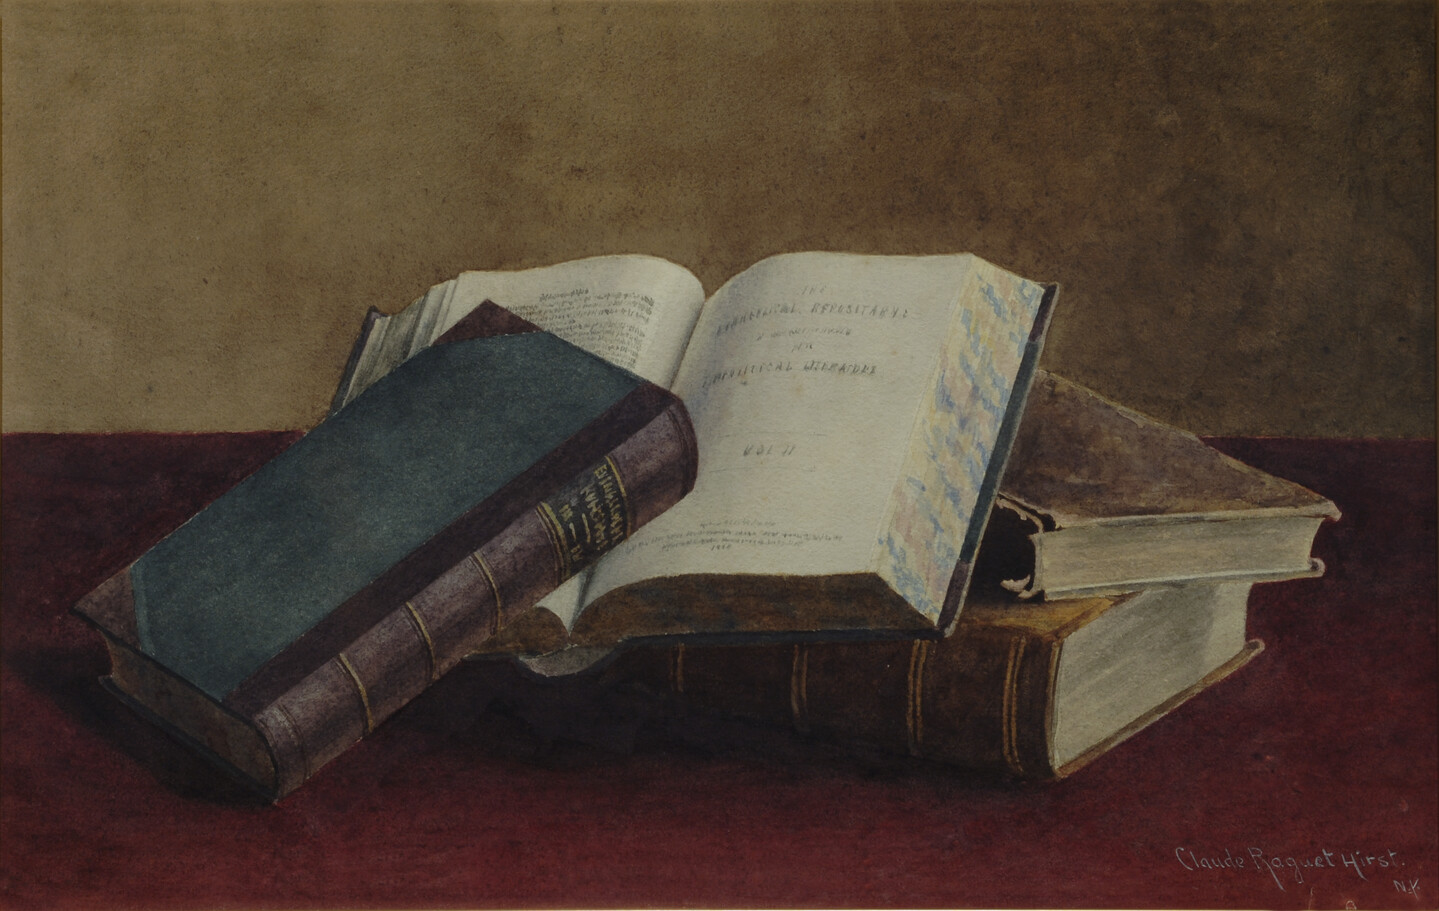 A stack of books sitting on a red tabletop in front of a speckled brown background. One of the books is flipped open with another closed book keeping it open.